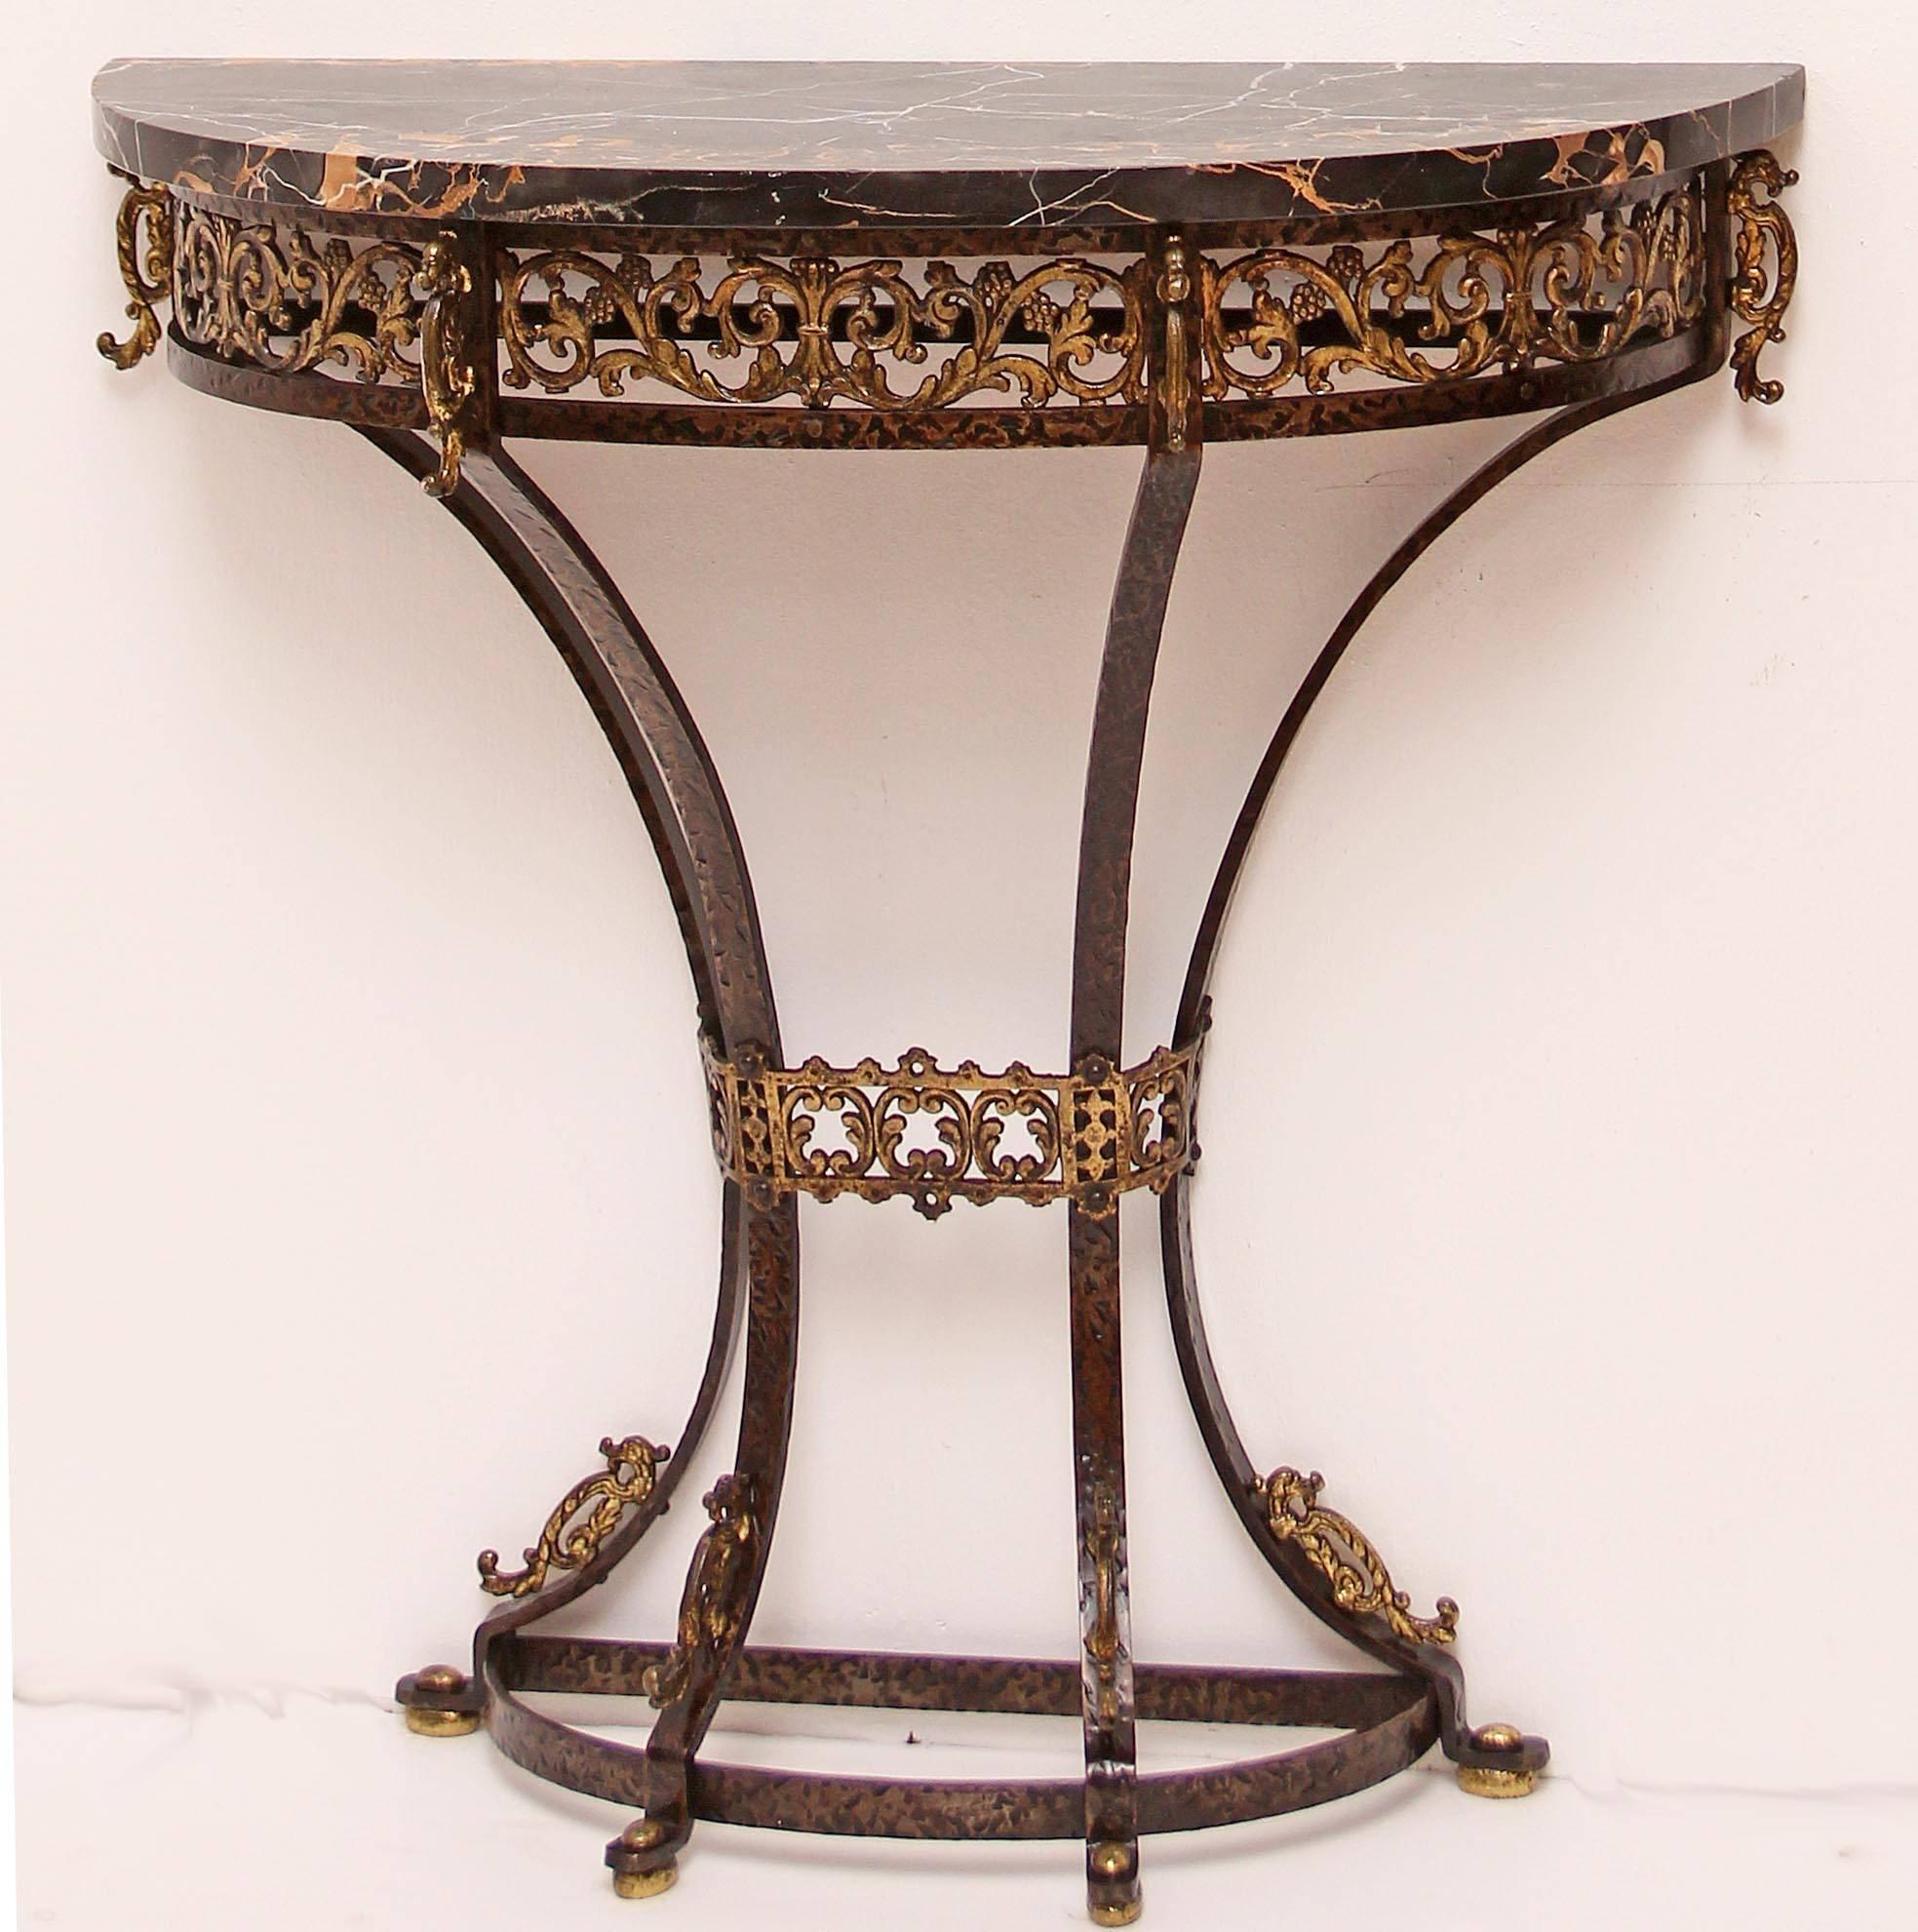 Antique hammered and gilt wrought iron console and mirror attributed to Oscar Bach. Figured black marble top.